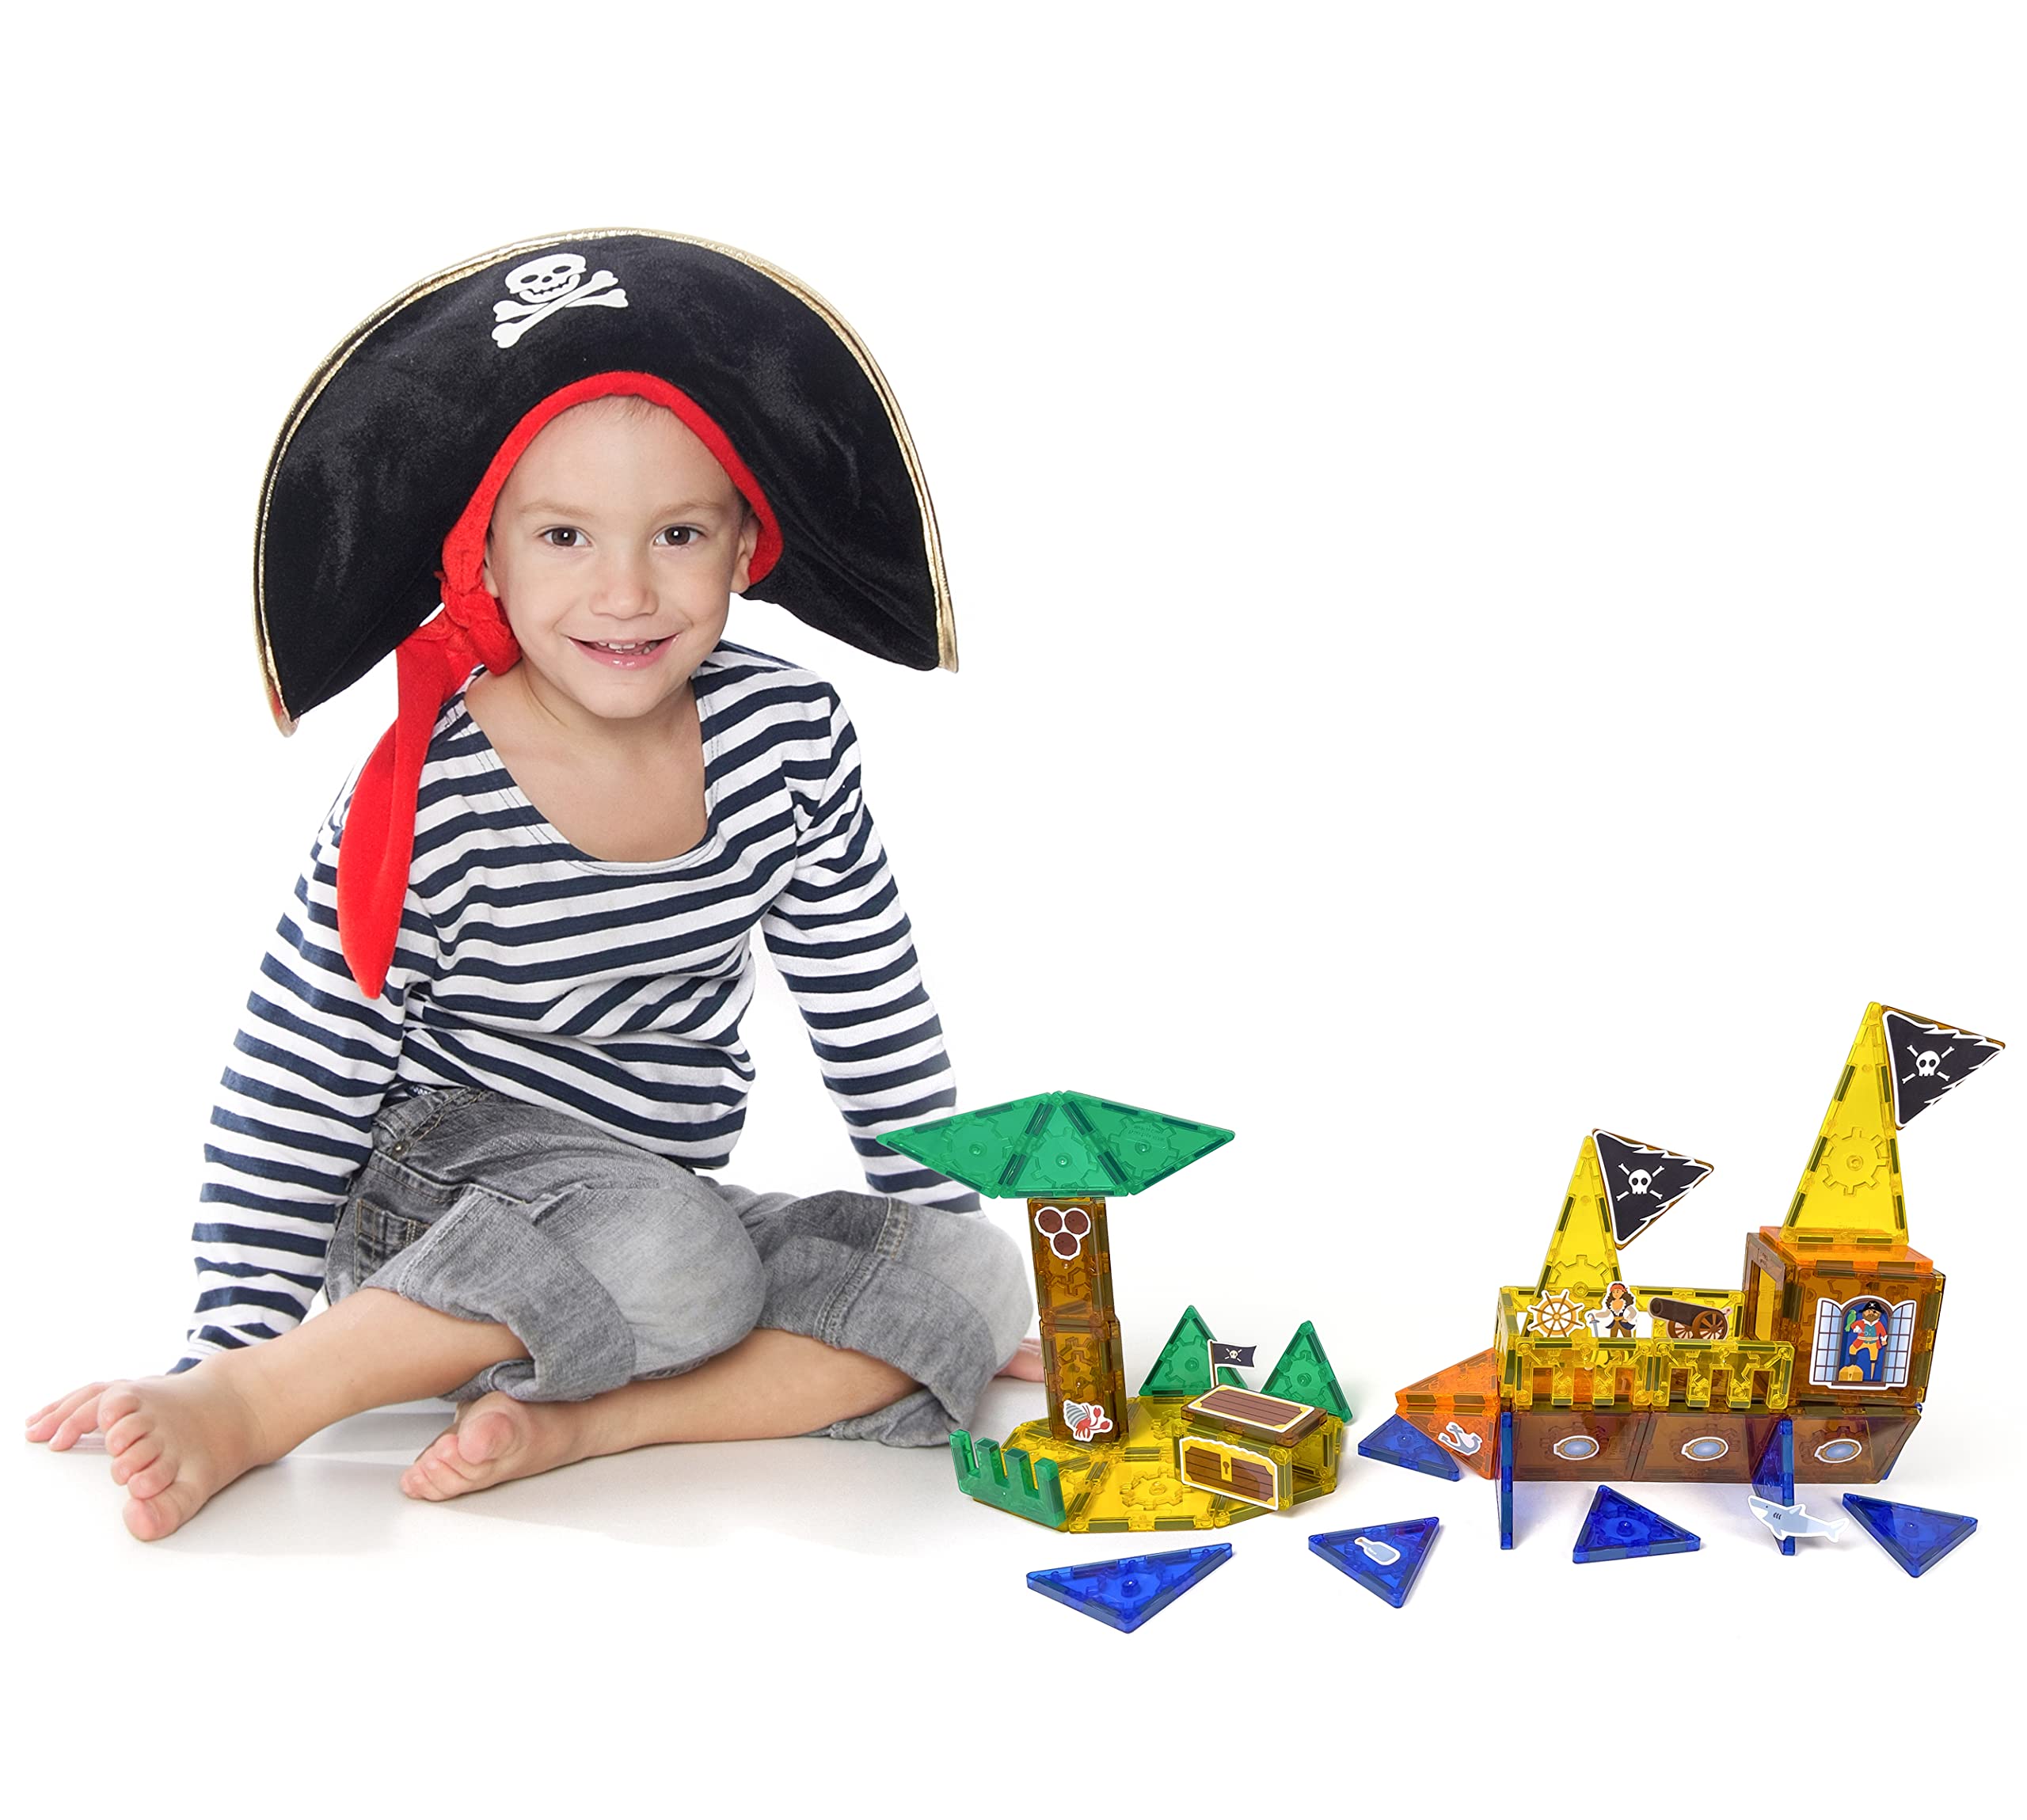 Tytan Tiles Pirate Ship & Island 60-Piece Magnetic Tiles Building Set, Fun Kids’ STEM Toy, Creative Play, Shape & Pattern Recognition, Fine Motor Skills, Includes Storage Bag, Ages 3+